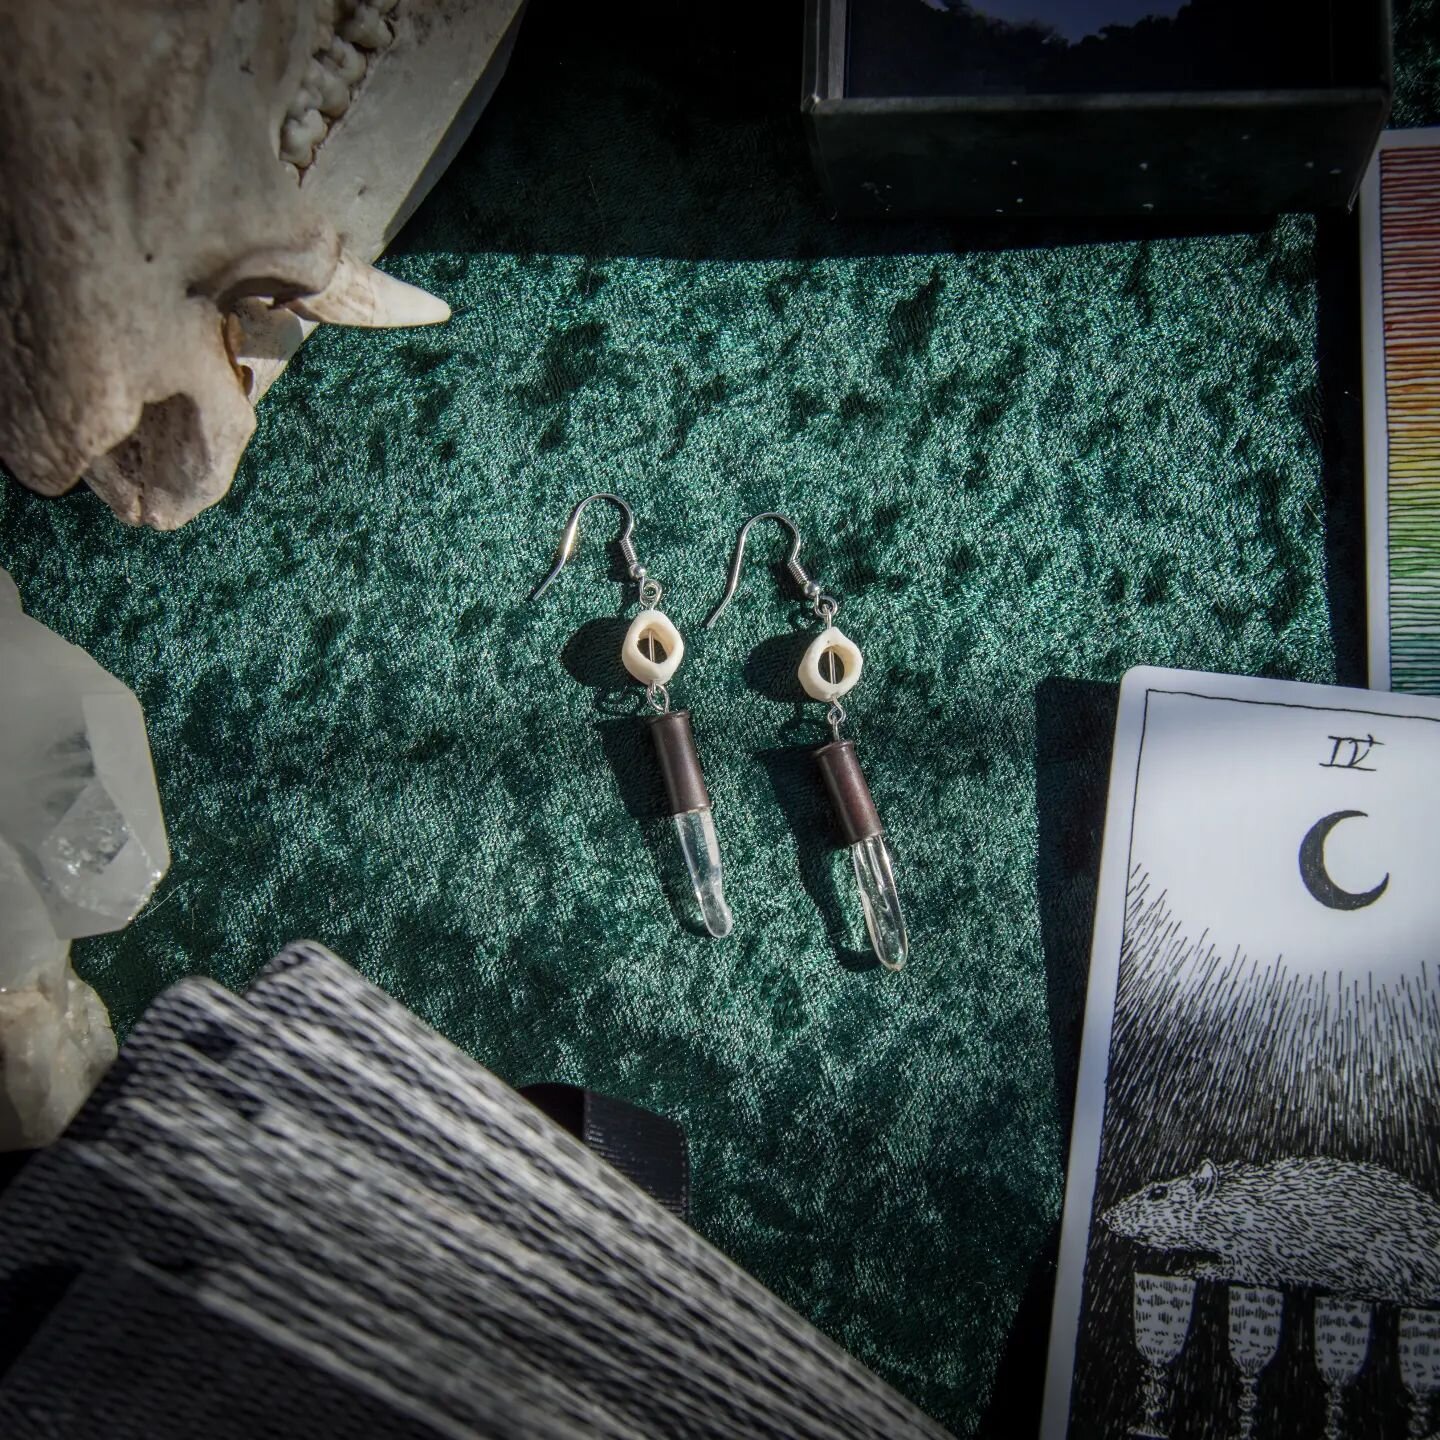 IV OF CUPS ☮

⭐Bone beads made from opossum femur, hand sawed, drilled and sanded, clear quartz, reclaimed bullet casings. Surgical steel earring hooks. ⭐

✨This set of earrings talismans drew the four of cups card. This card presents a message of se